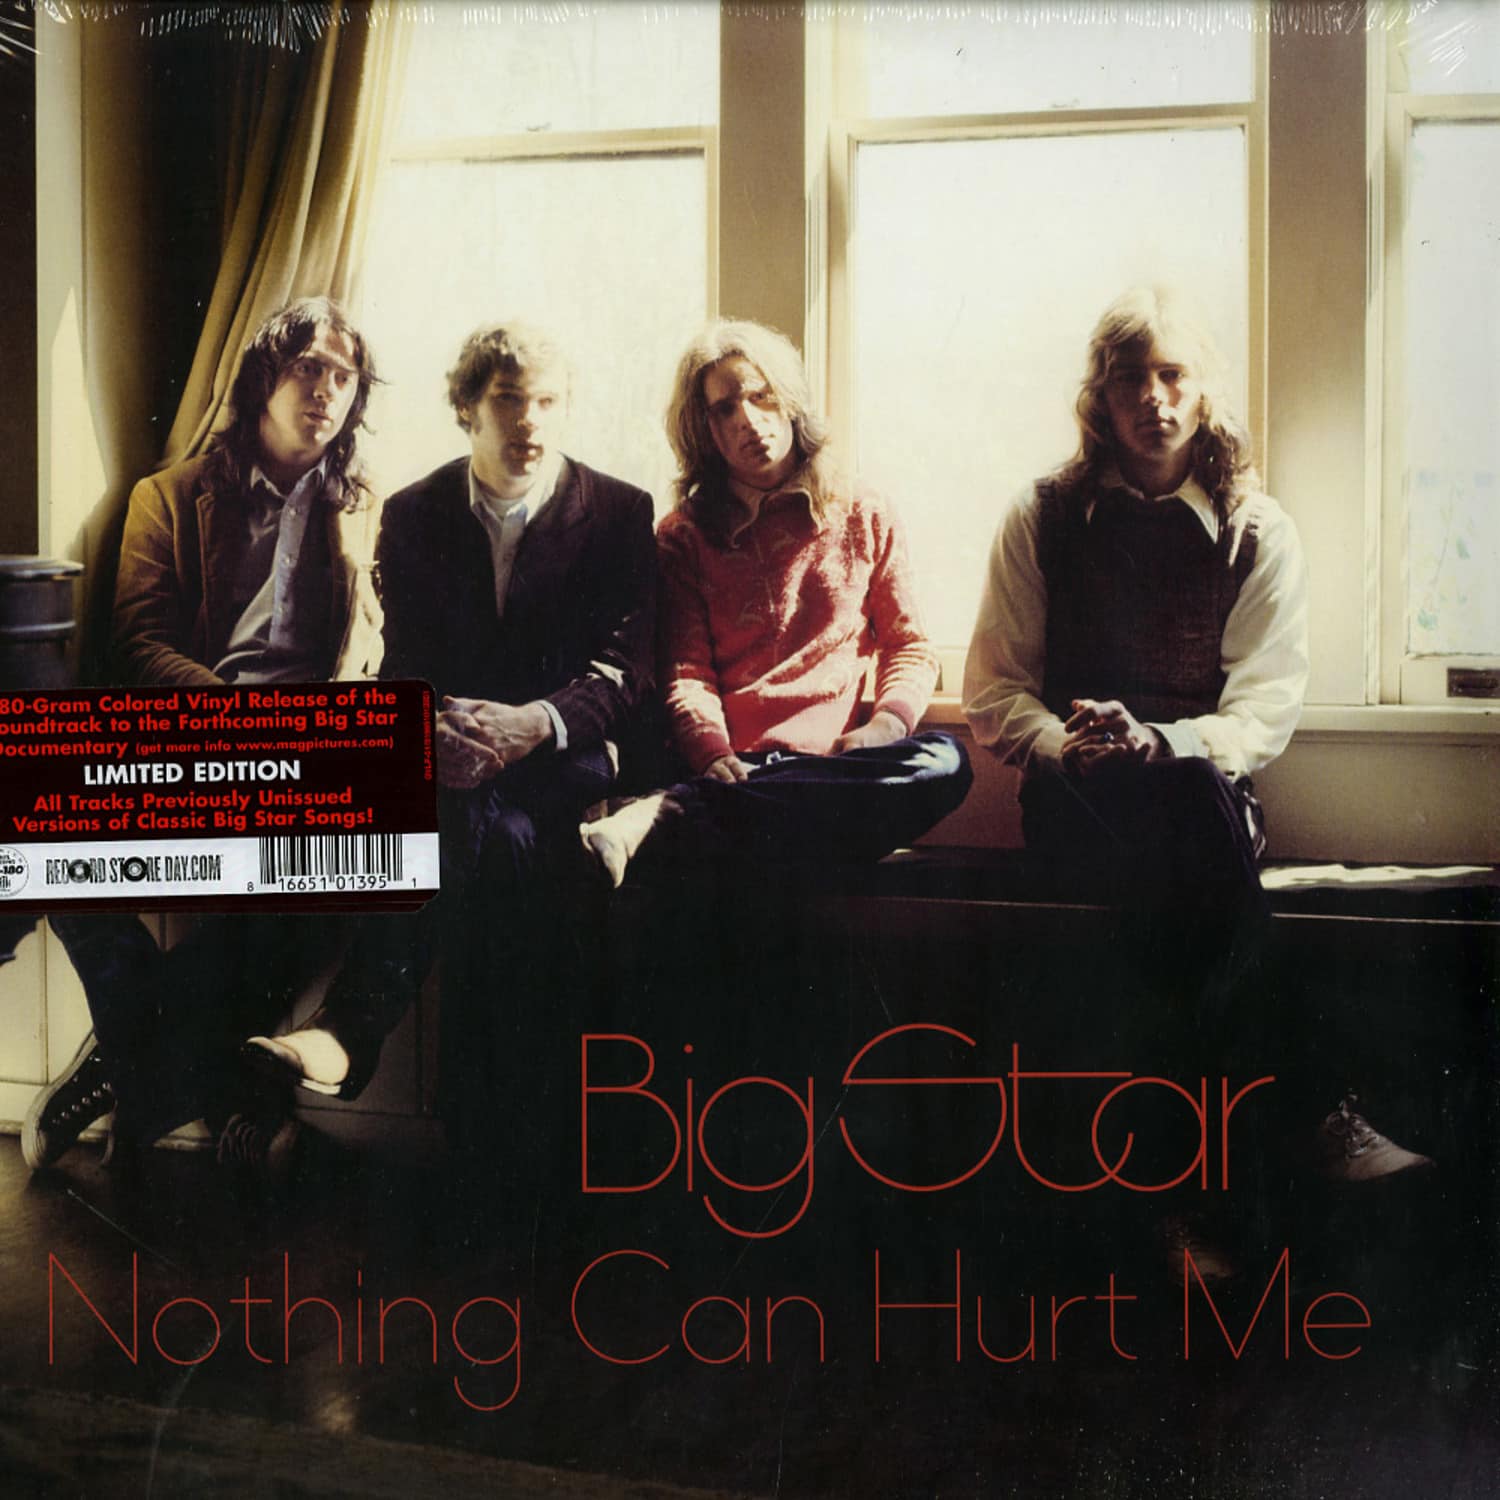 Big Star - NOTHING CAN HURT ME 